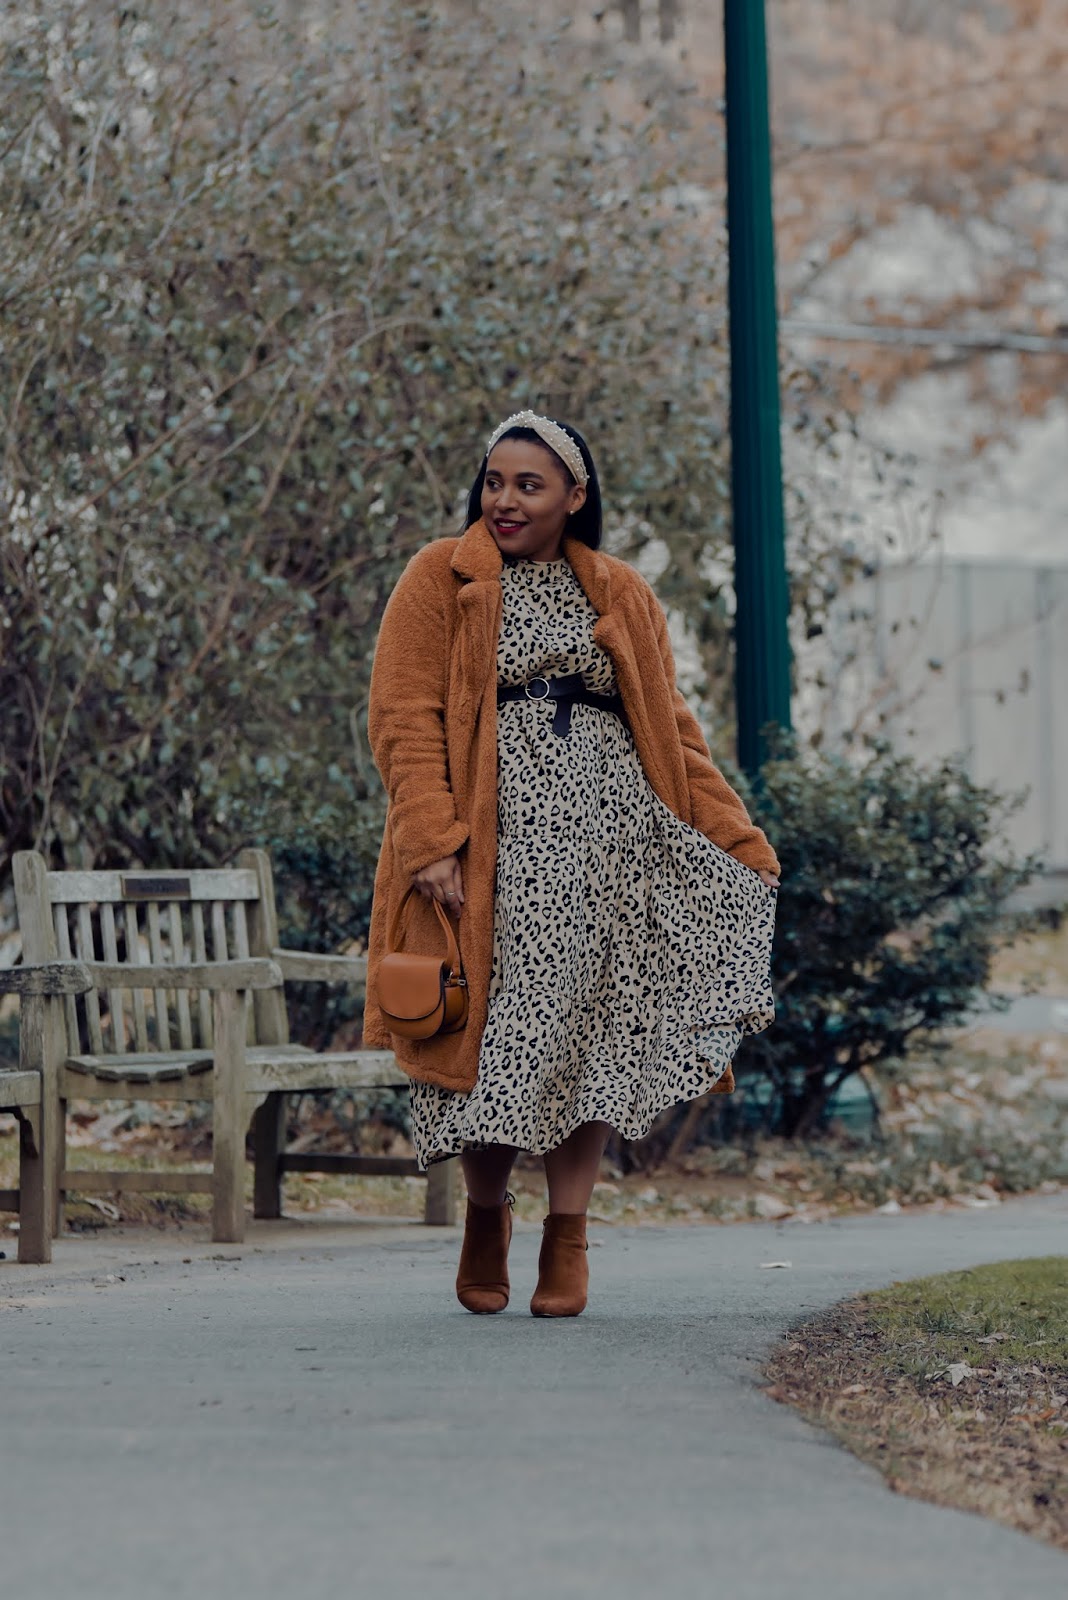 HOW TO STYLE A DRESS FOR WINTER  OUTFIT IDEAS — Patty's Kloset